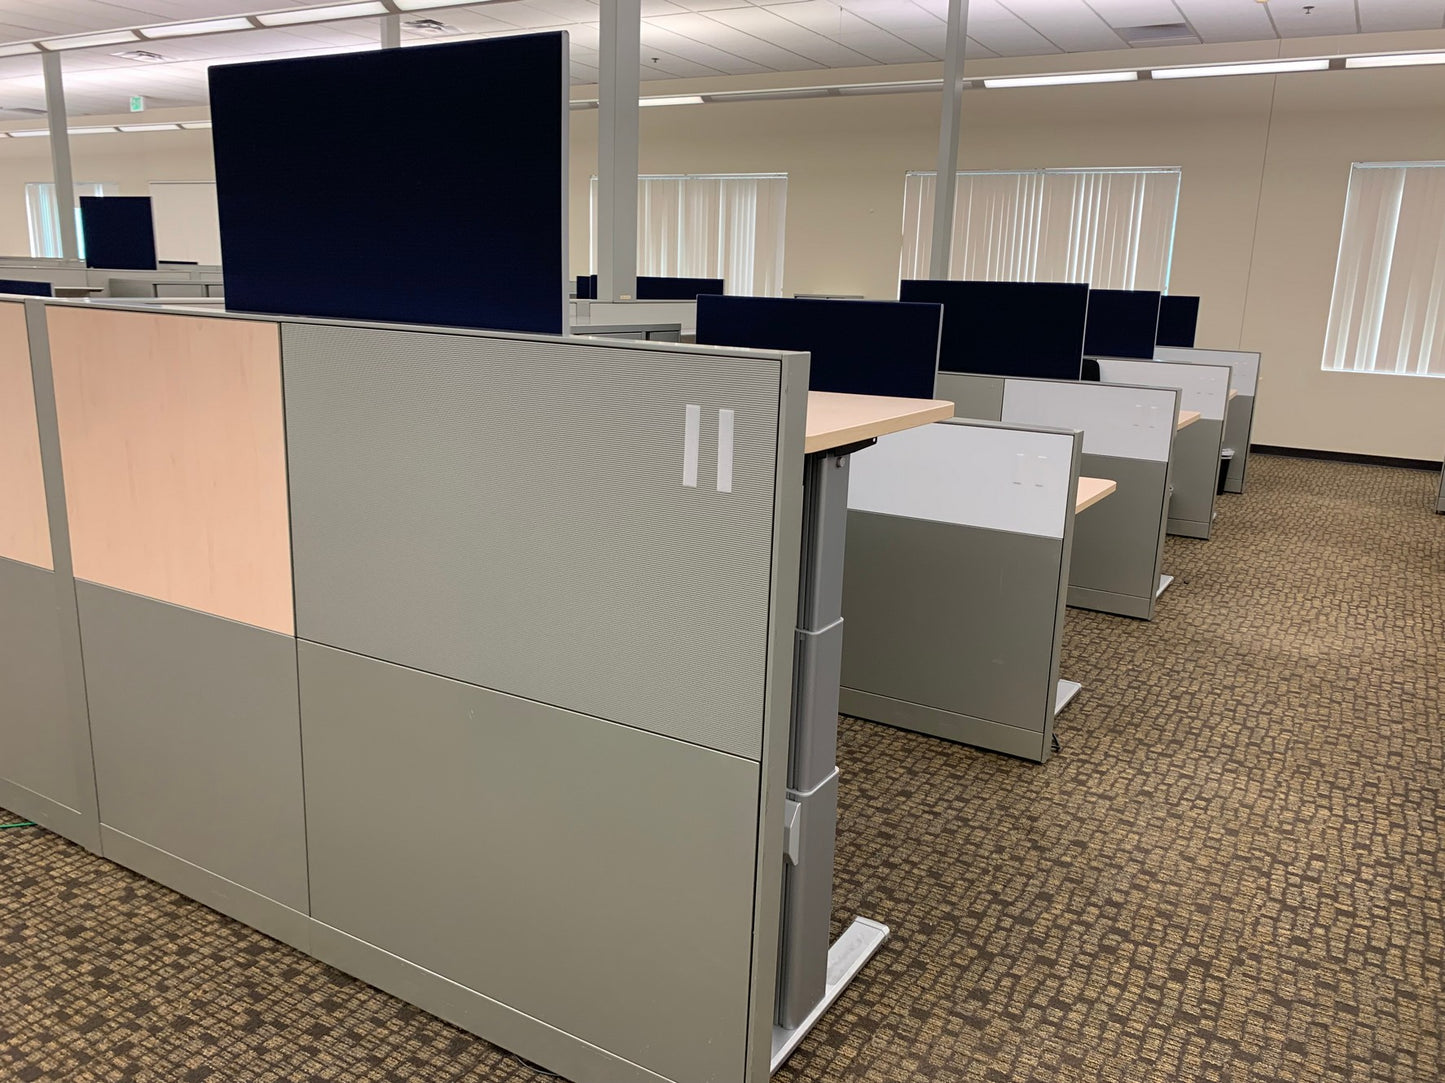 STEELCASE ANSWER 6' x 6' 10-PACK WORKSTATION - NAVY SCREEN